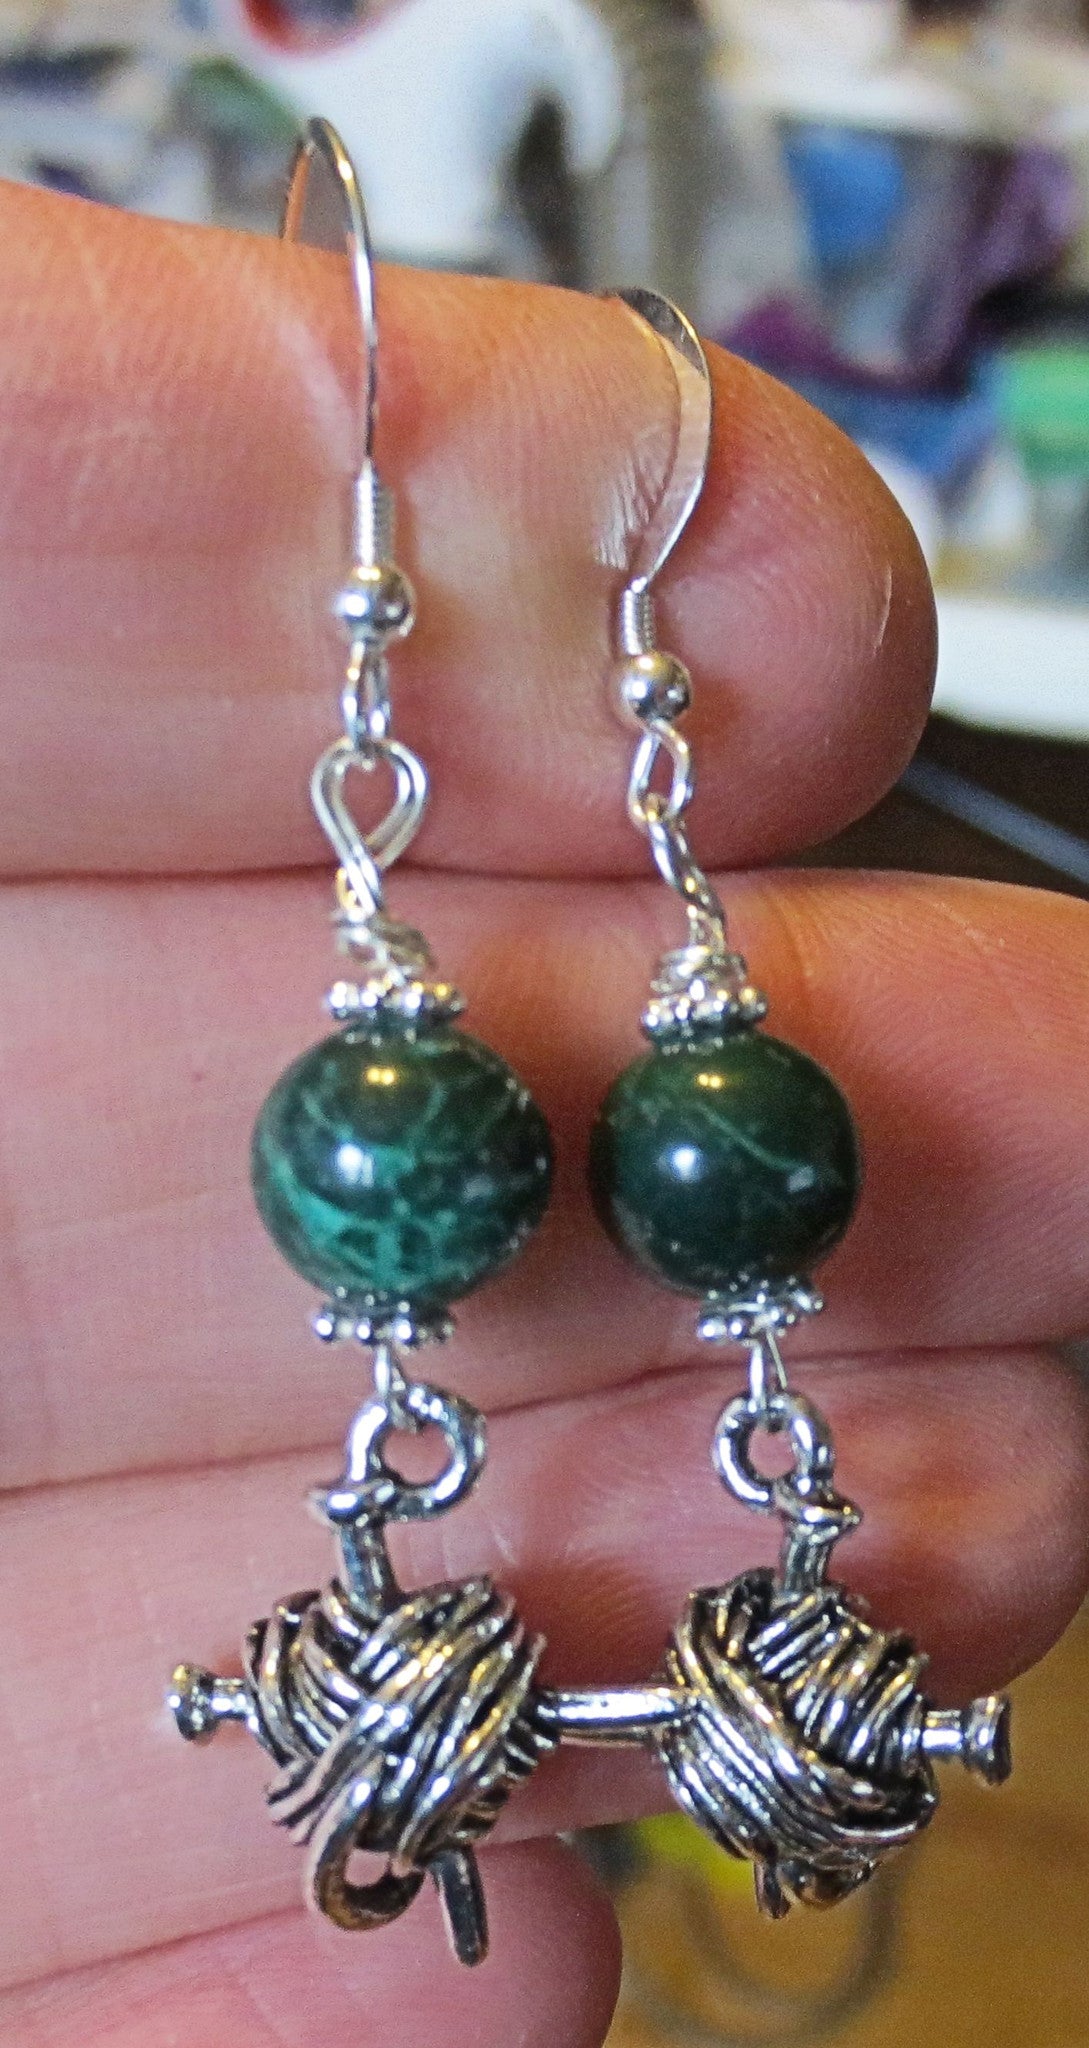 knitting theme silver earrings -- plain or with gemstones -- yarn with needles greenjasper / sterling silver wires / knitting charm